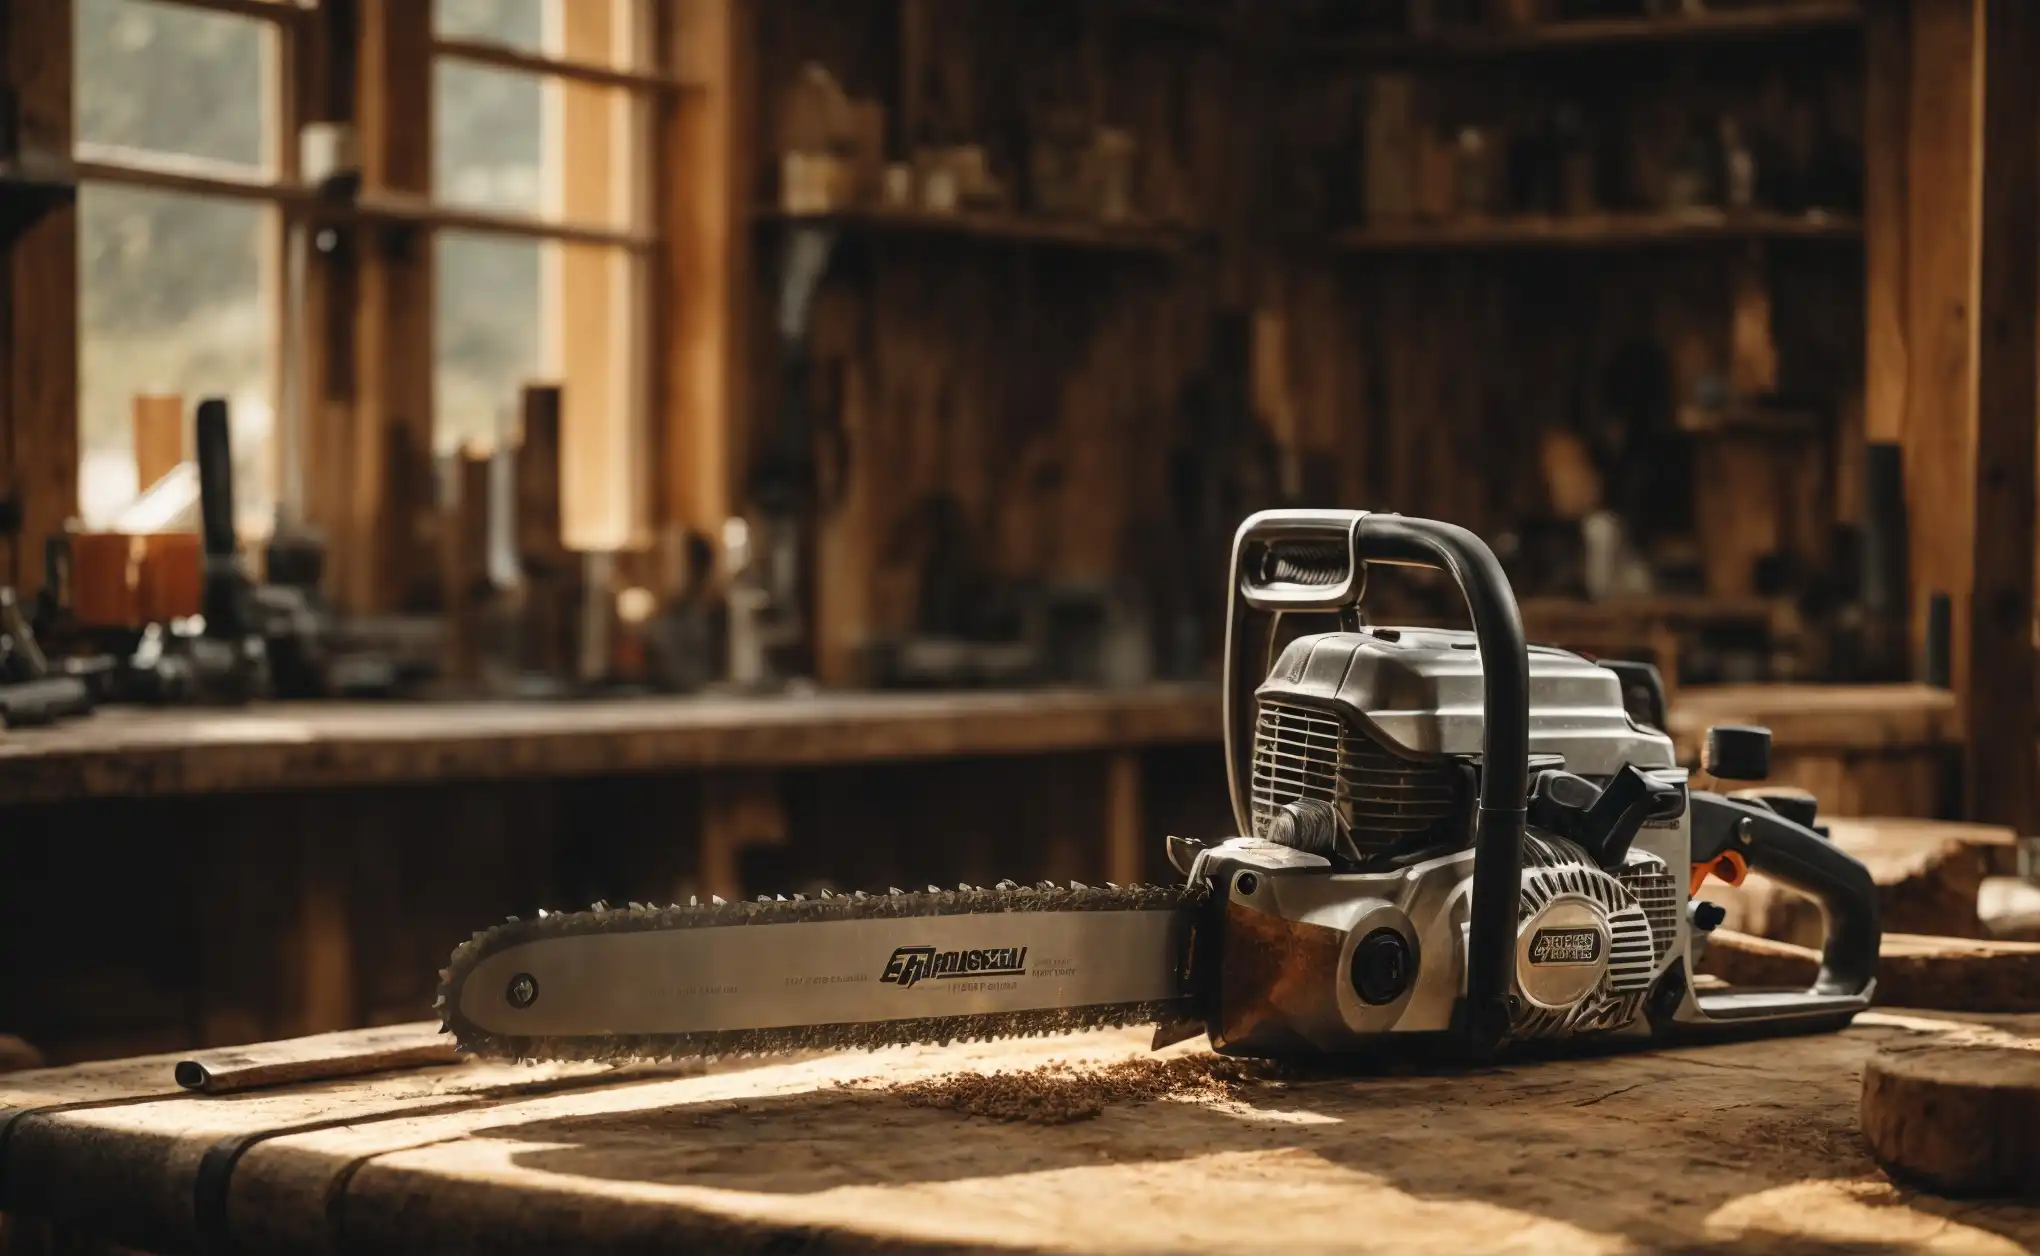 Why Did Stihl Discontinue the MS290? Inside Scoop